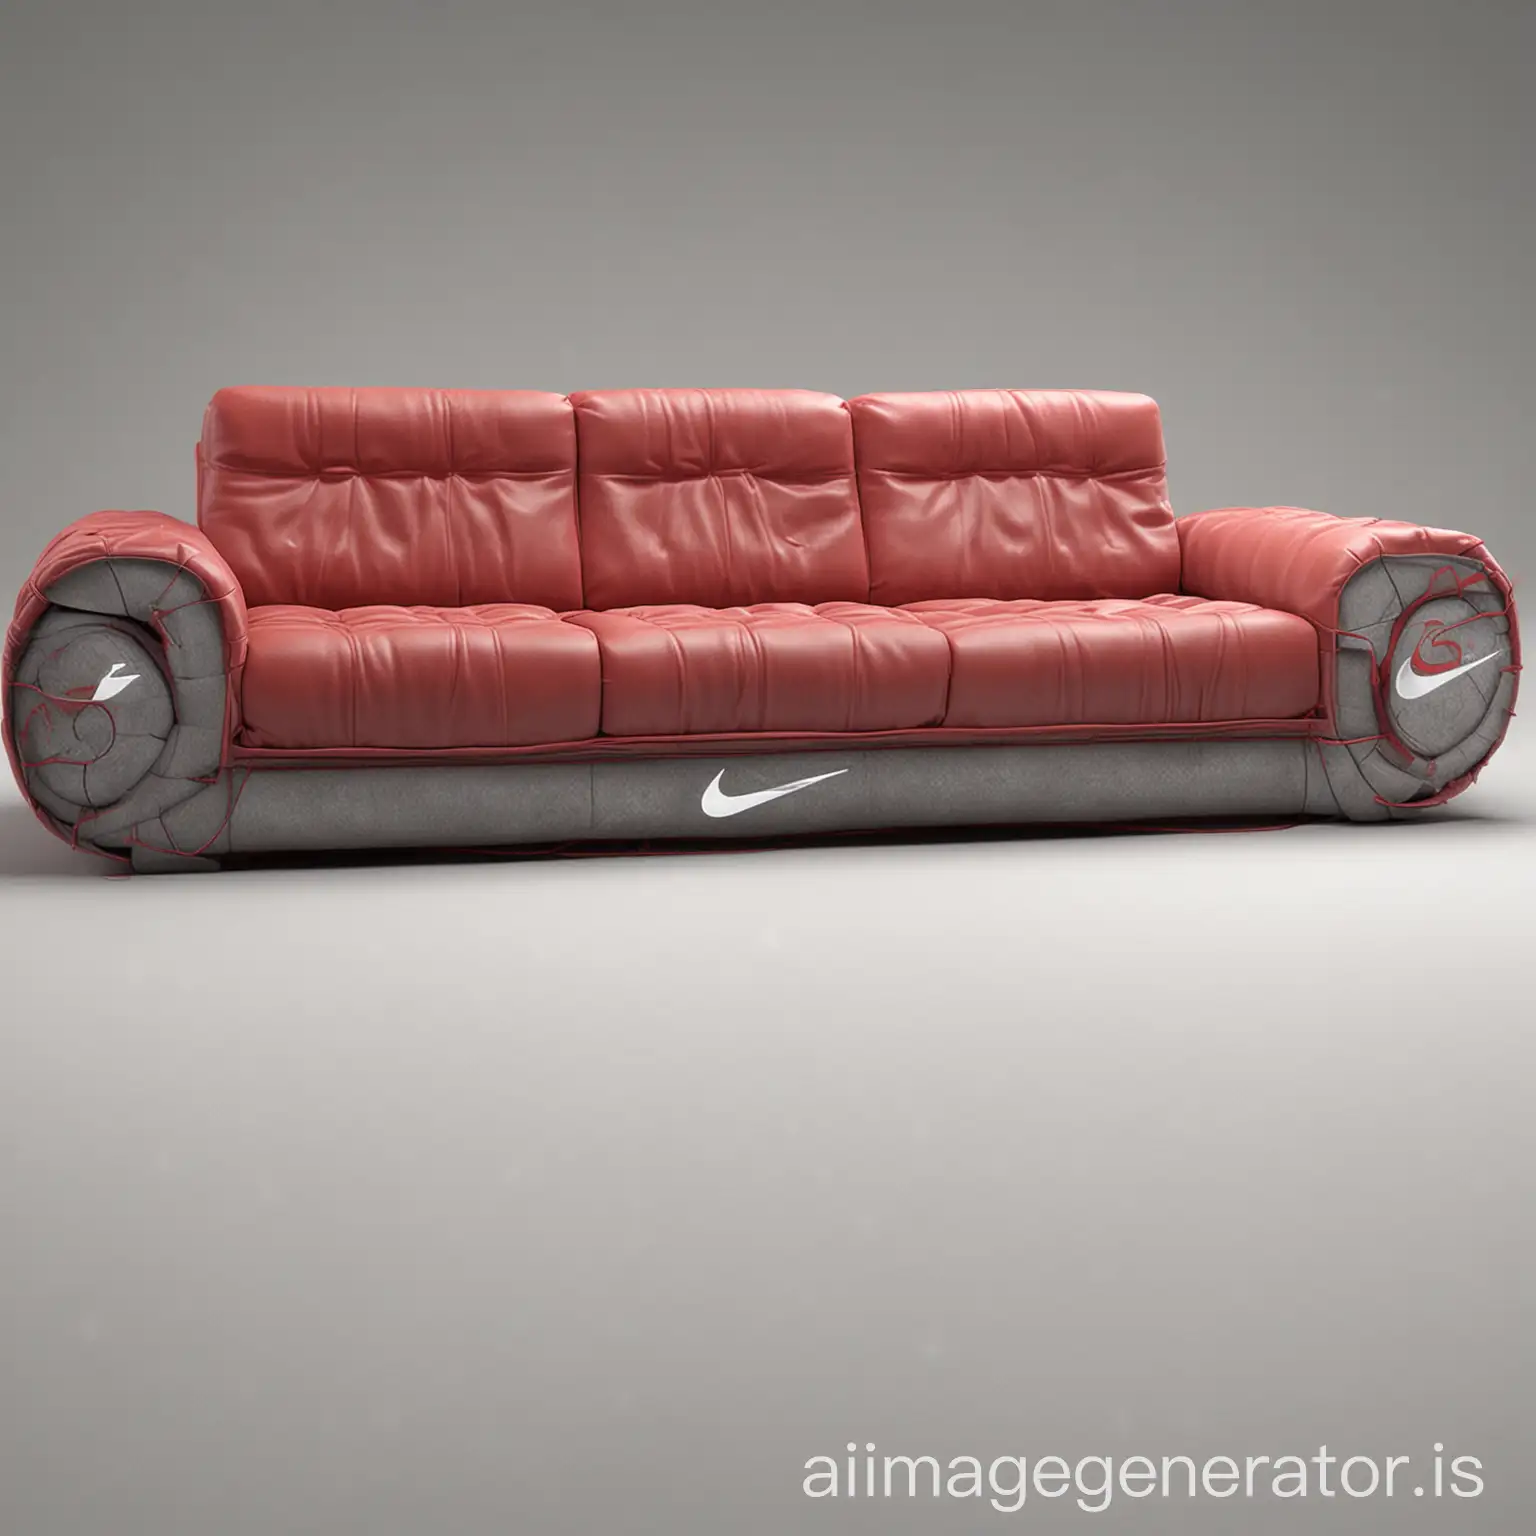 triple seat sofa inspired by nike shoes